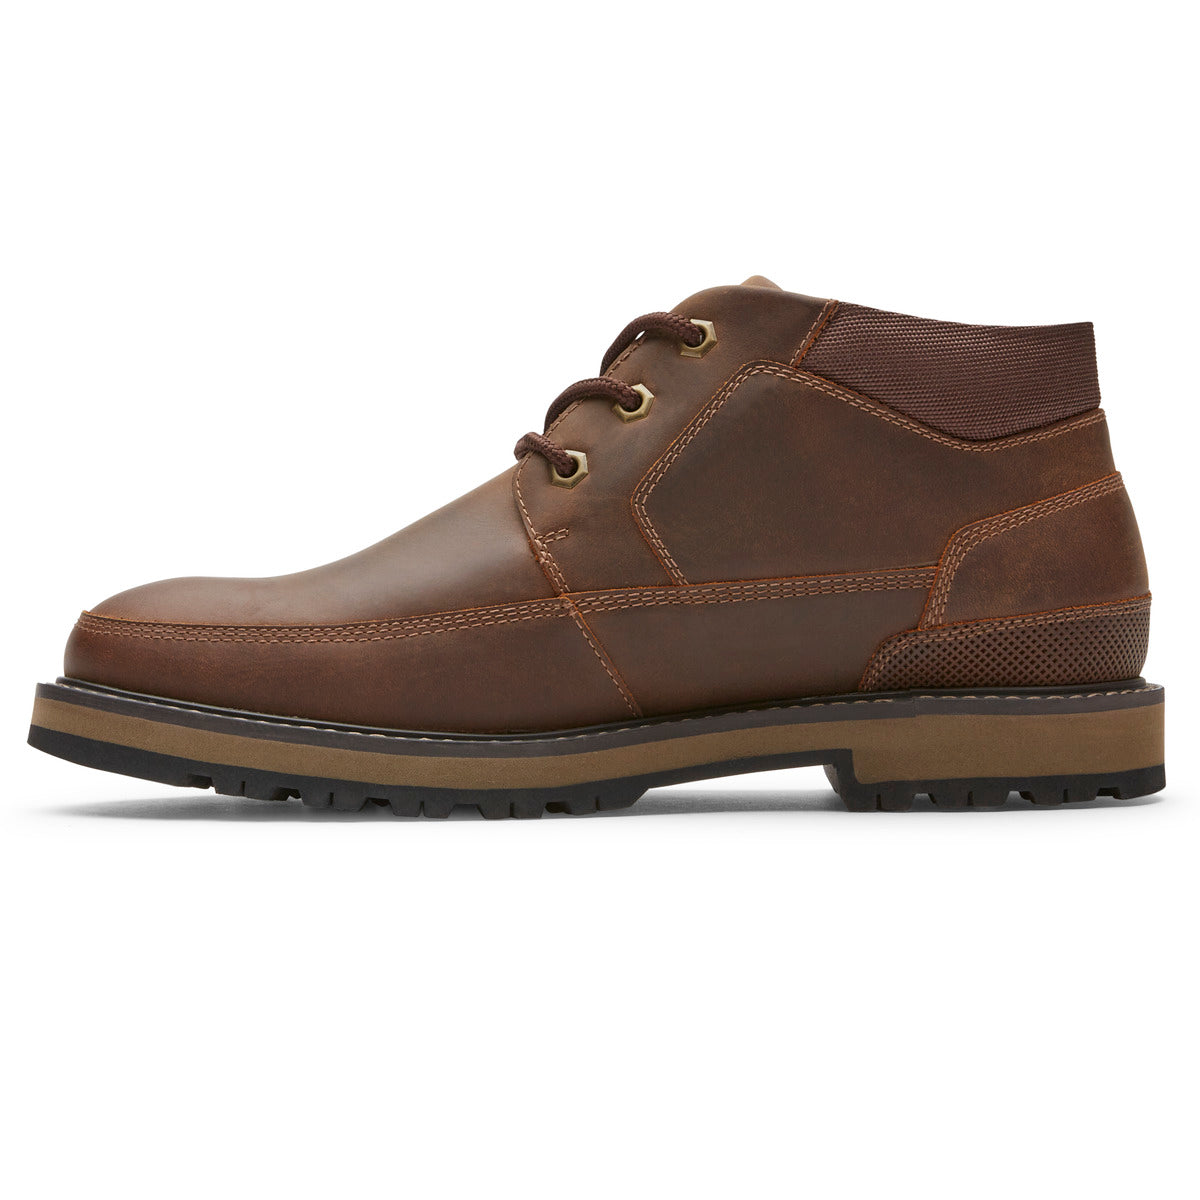 OUTLET FOOTWEAR Rockport CHUKKA - Botines hombre brown nbk